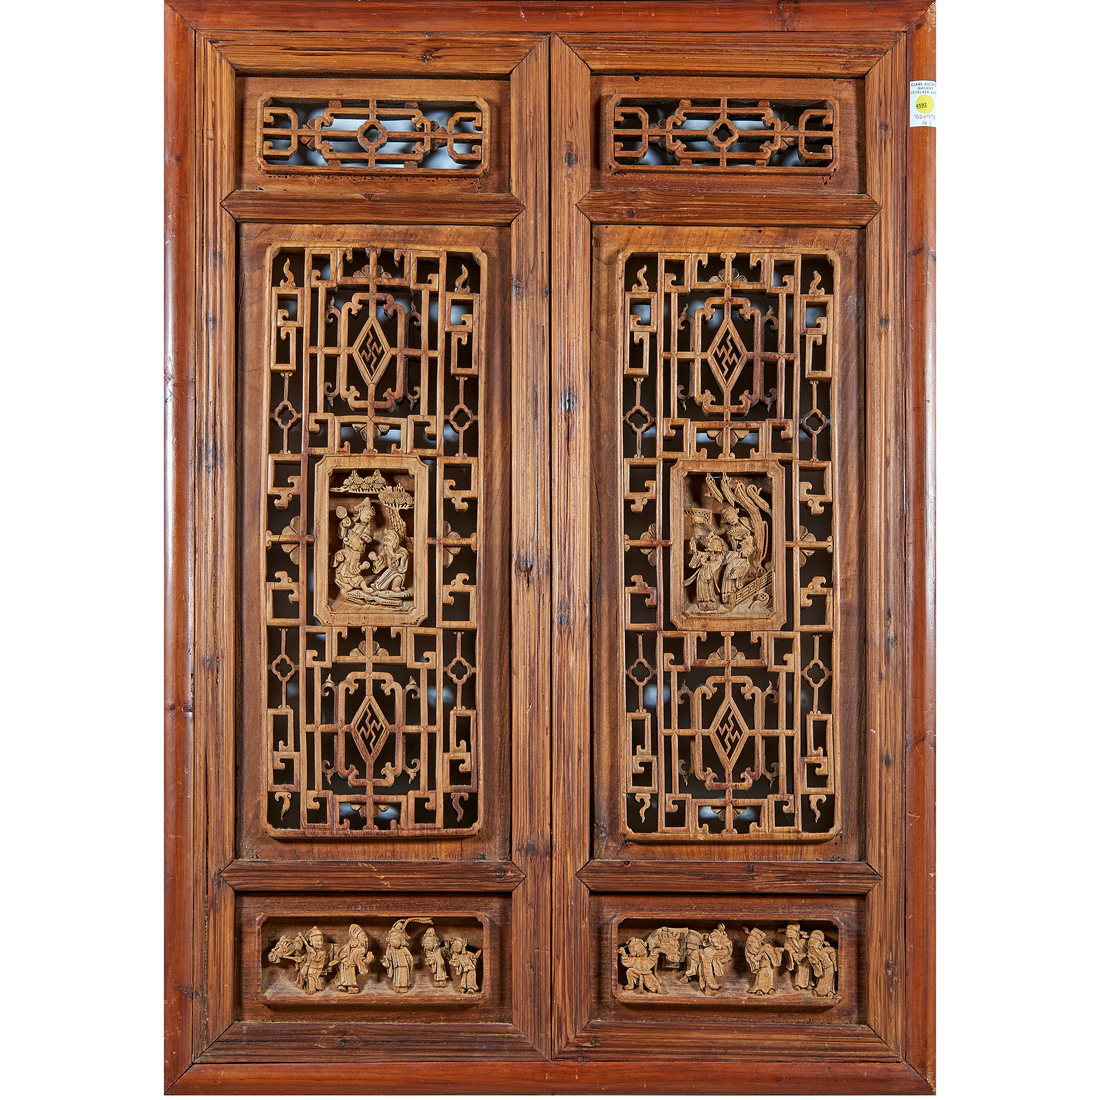 PAIR OF CHINESE CARVED WOOD WINDOWS 3a1f1d